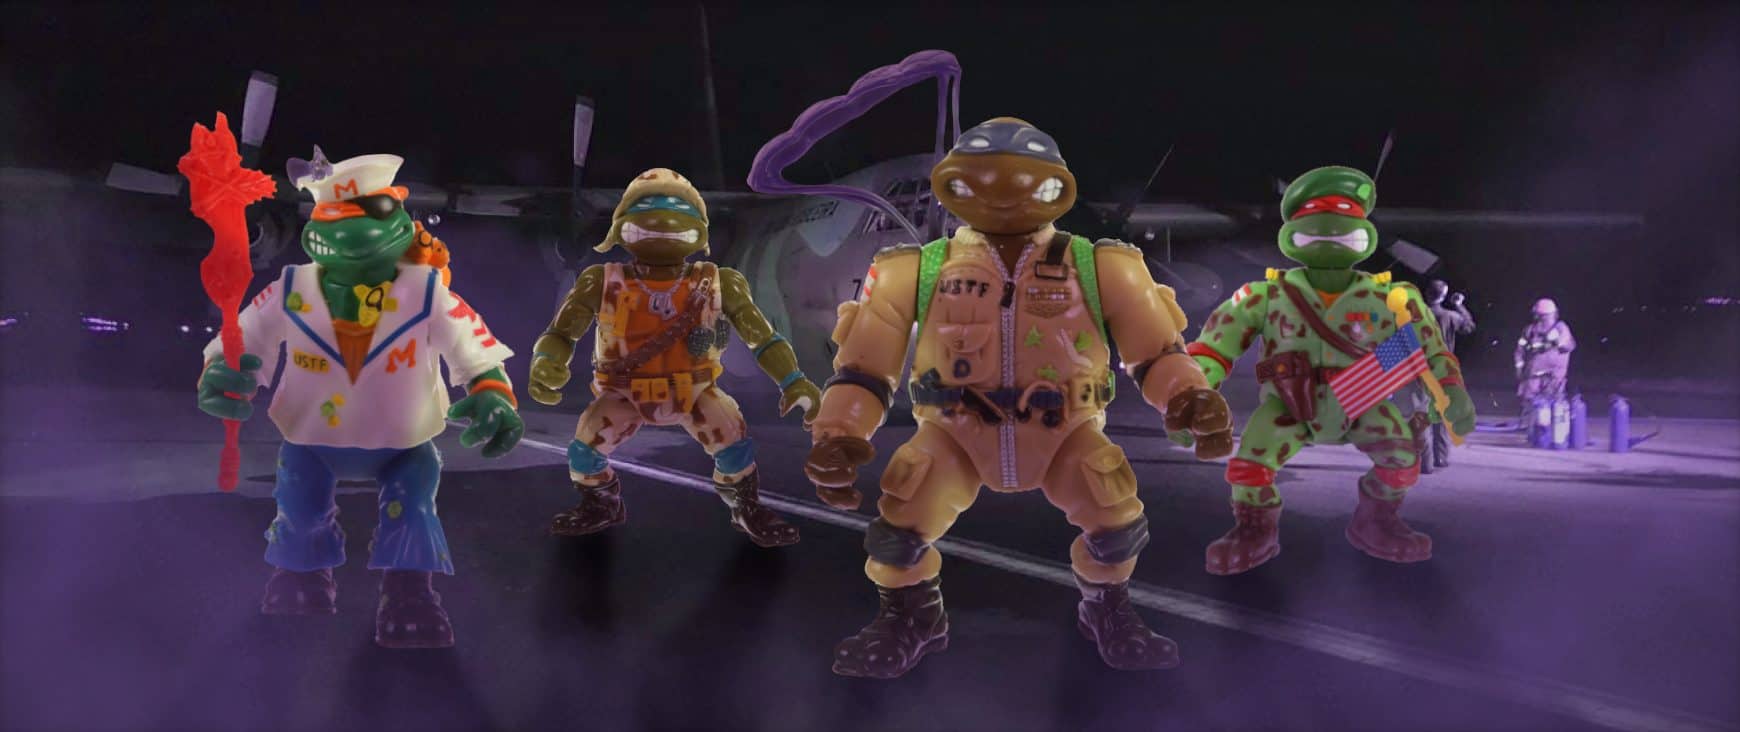 Mutant Military Turtles, TMNT action figures from 1991